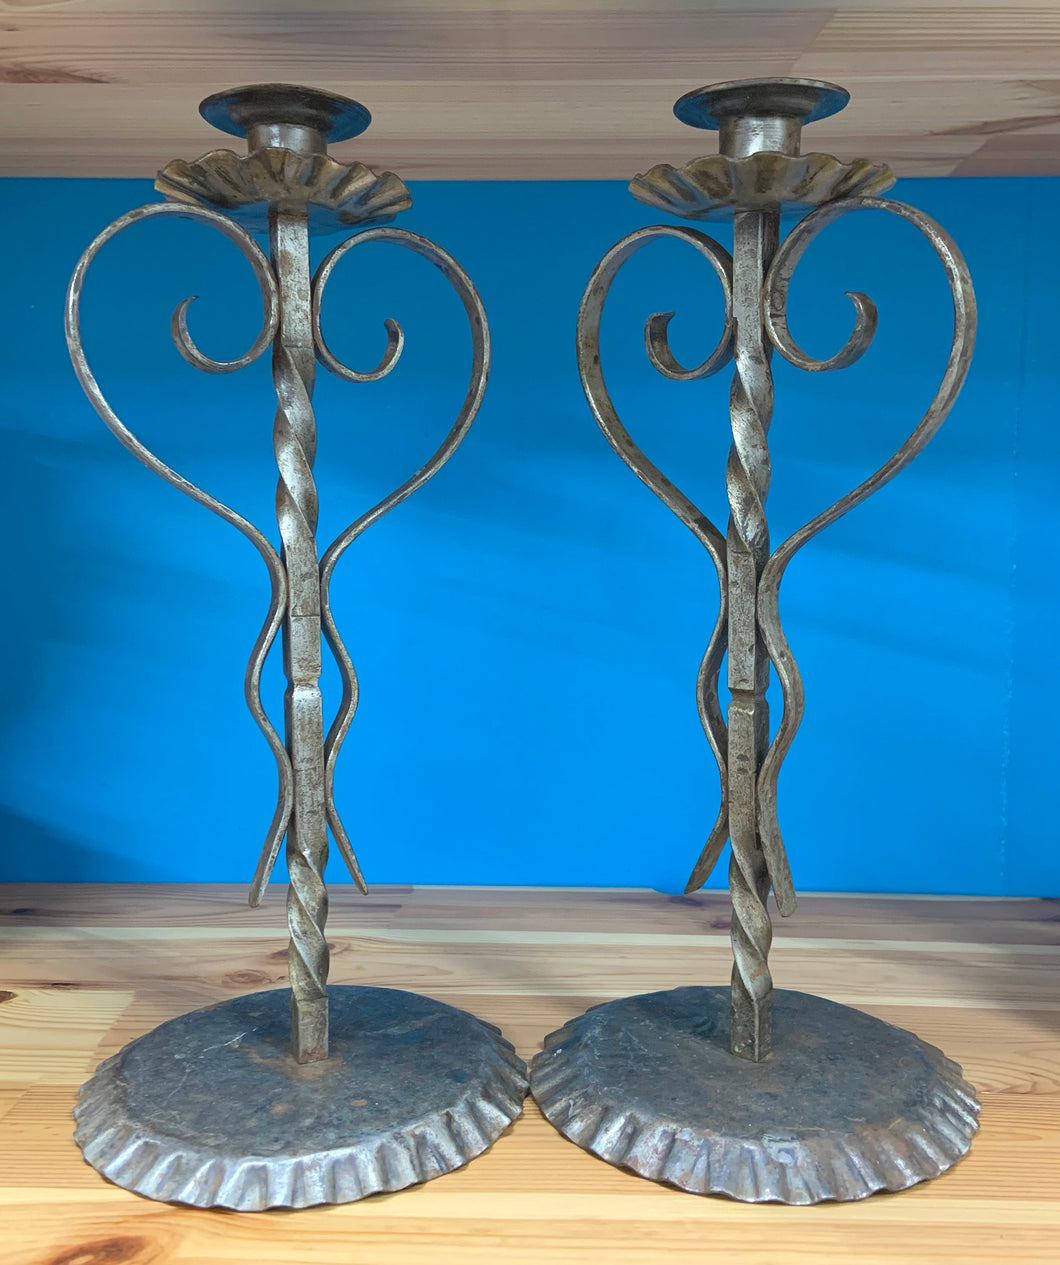 A fabulous pair of hand-forged iron candlesticks. In excellent vintage condition.  Measures approximately 12